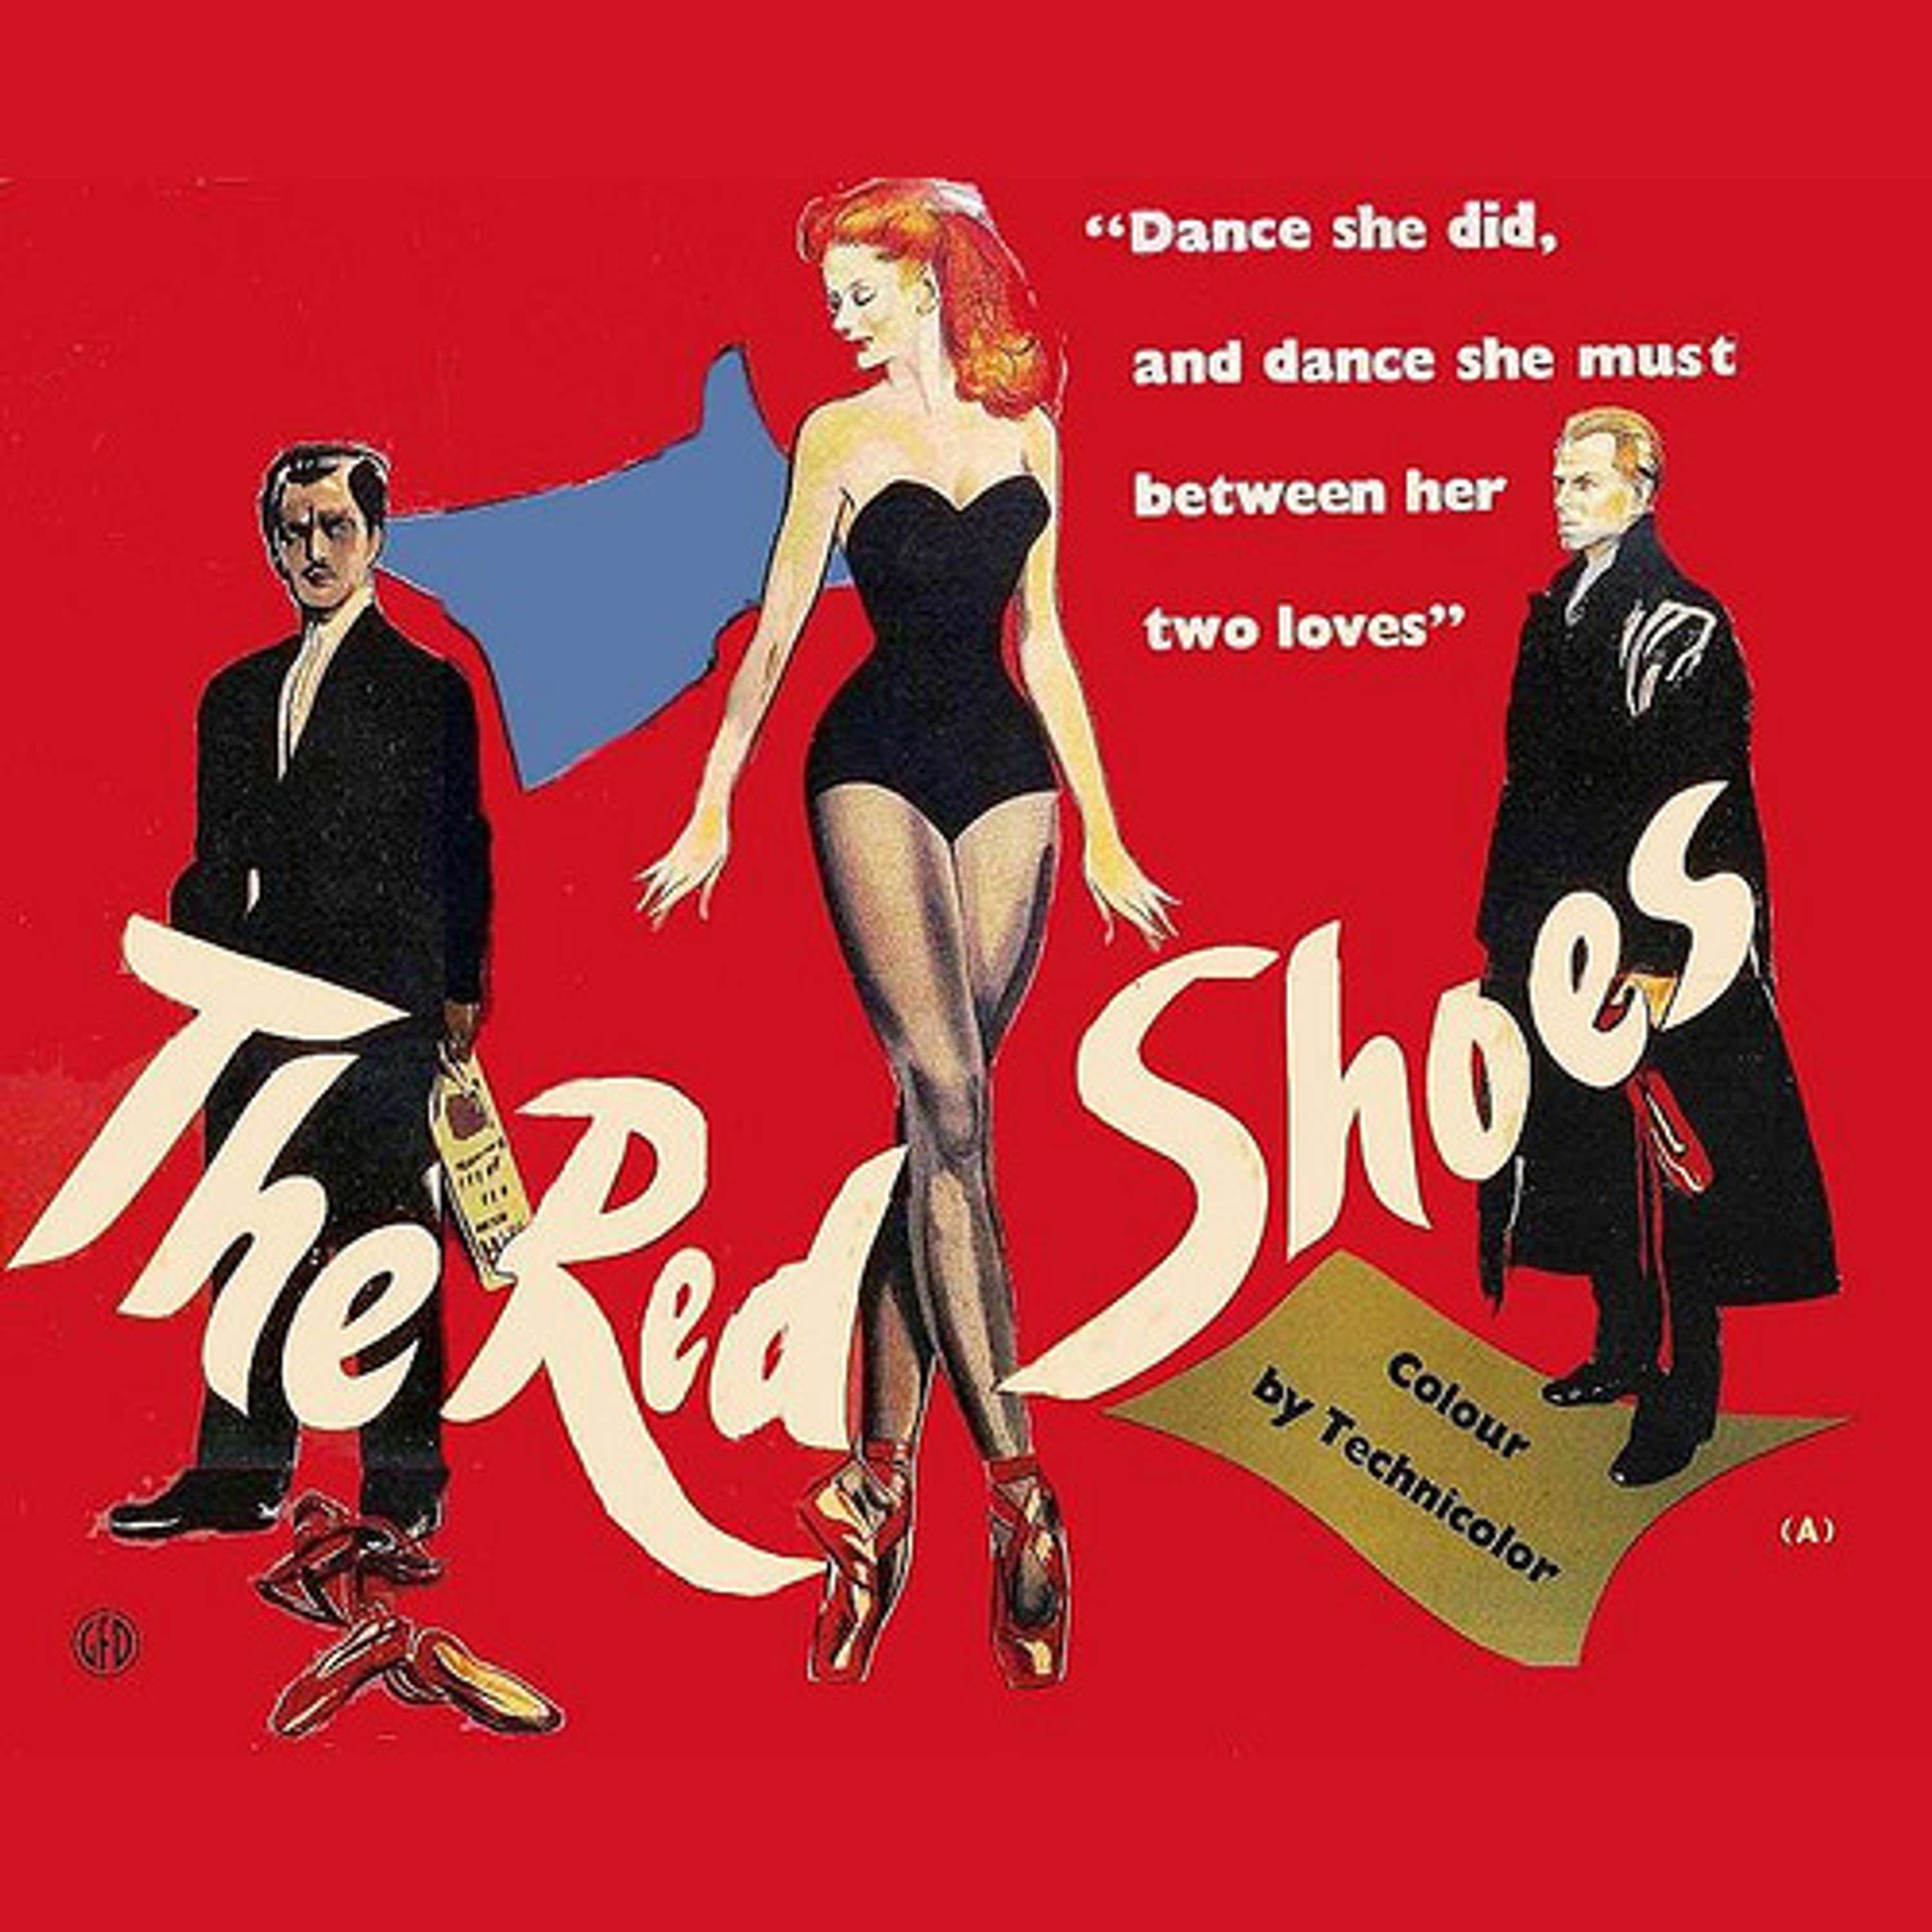 Красные башмачки. The Red Shoes 1948. Афиша красные башмачки. Poster Classic Shoe.